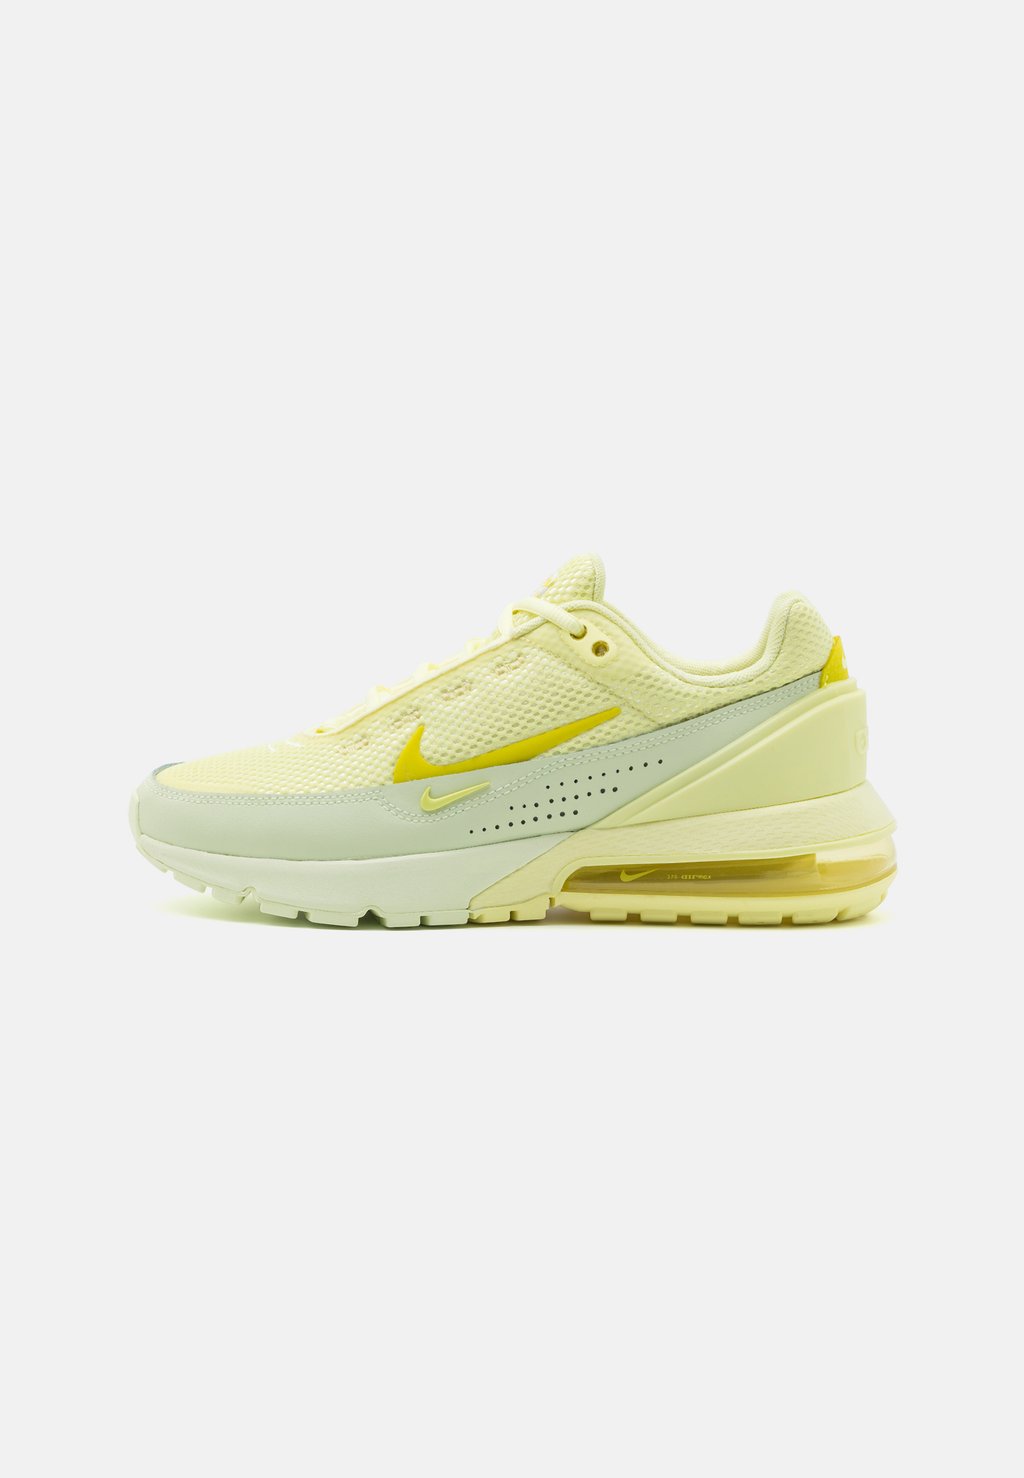 Низкие кроссовки Air Max Pulse Nike, цвет luminous green/high voltage/lime ice/light lemon twist/white taidacent 6 80v high voltage dc relay 30a detection control delay switch voltage controller over under voltage relays dc